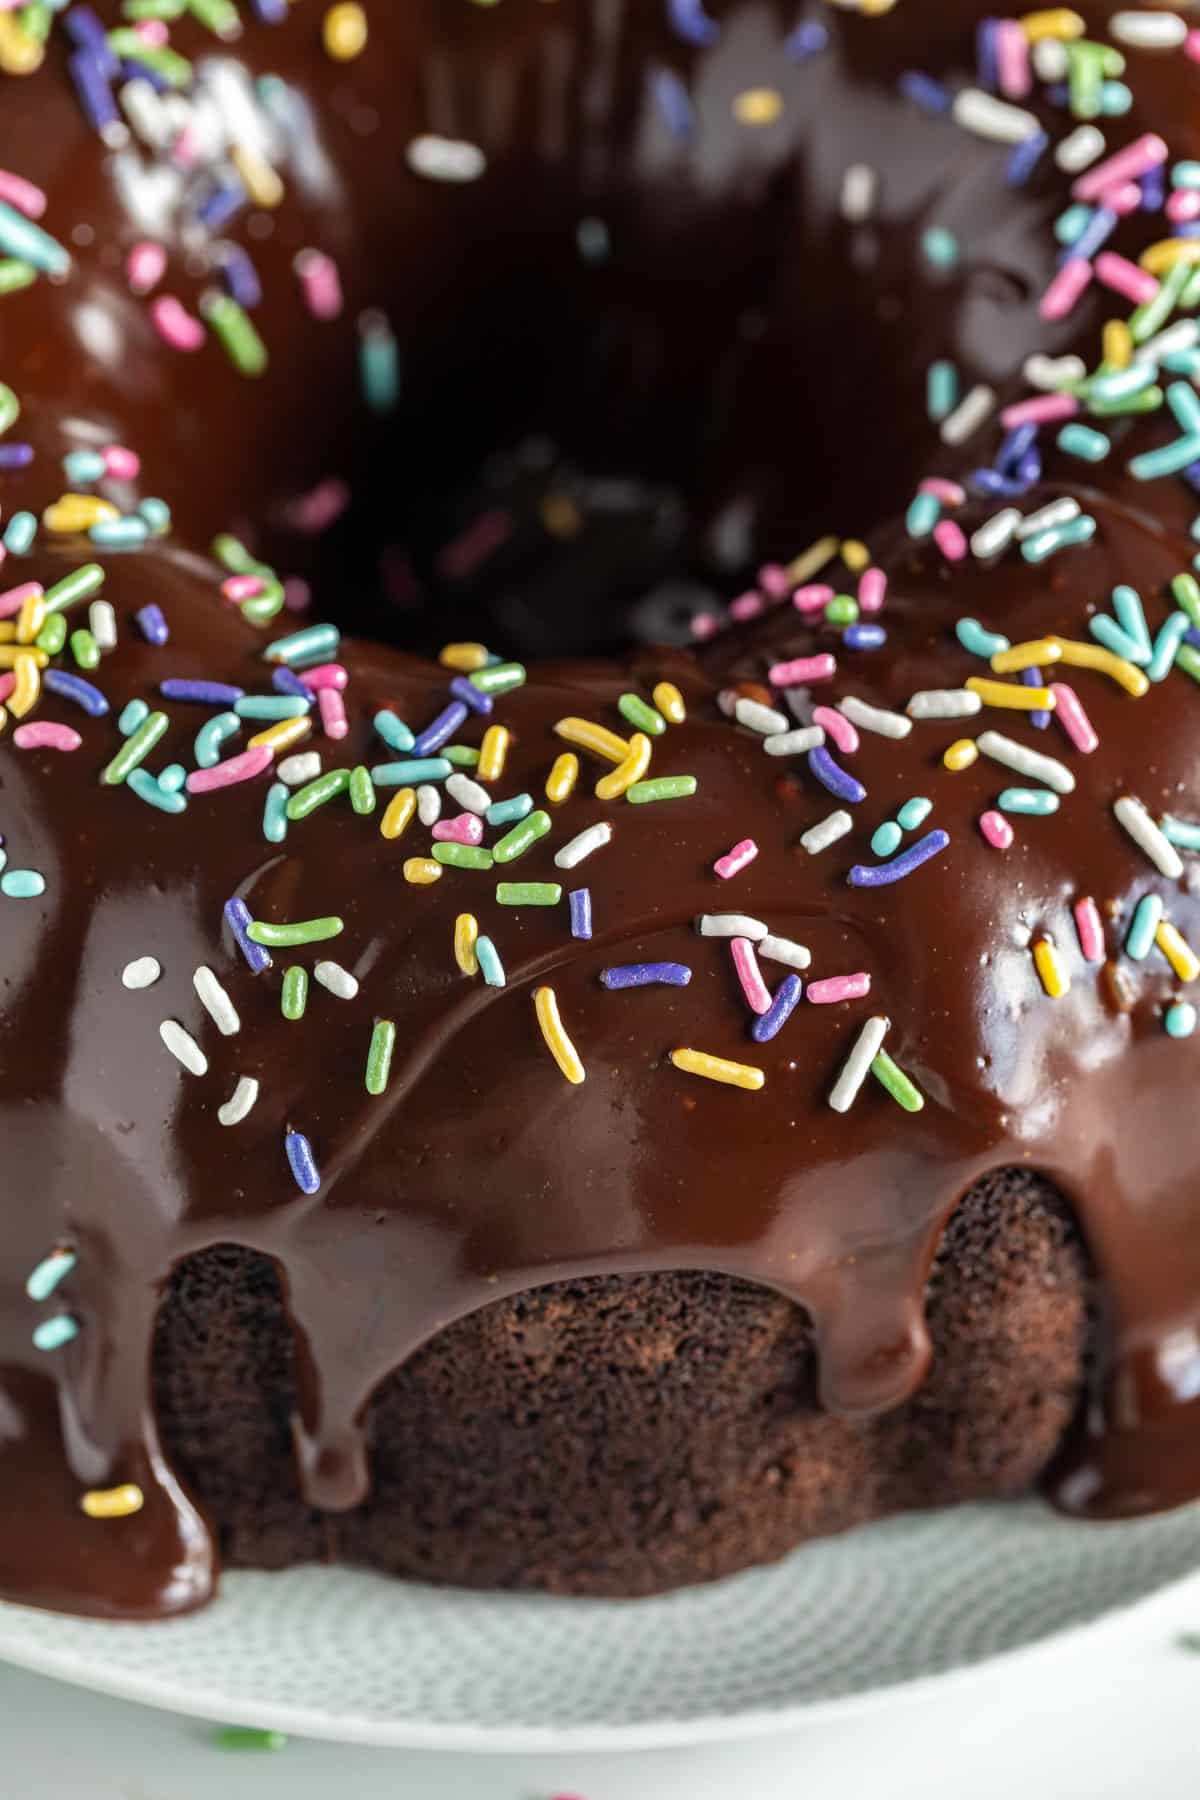 A close up image of the side of a chocolate cake showing the drips of ganache and rainbow sprinkles on top of it.